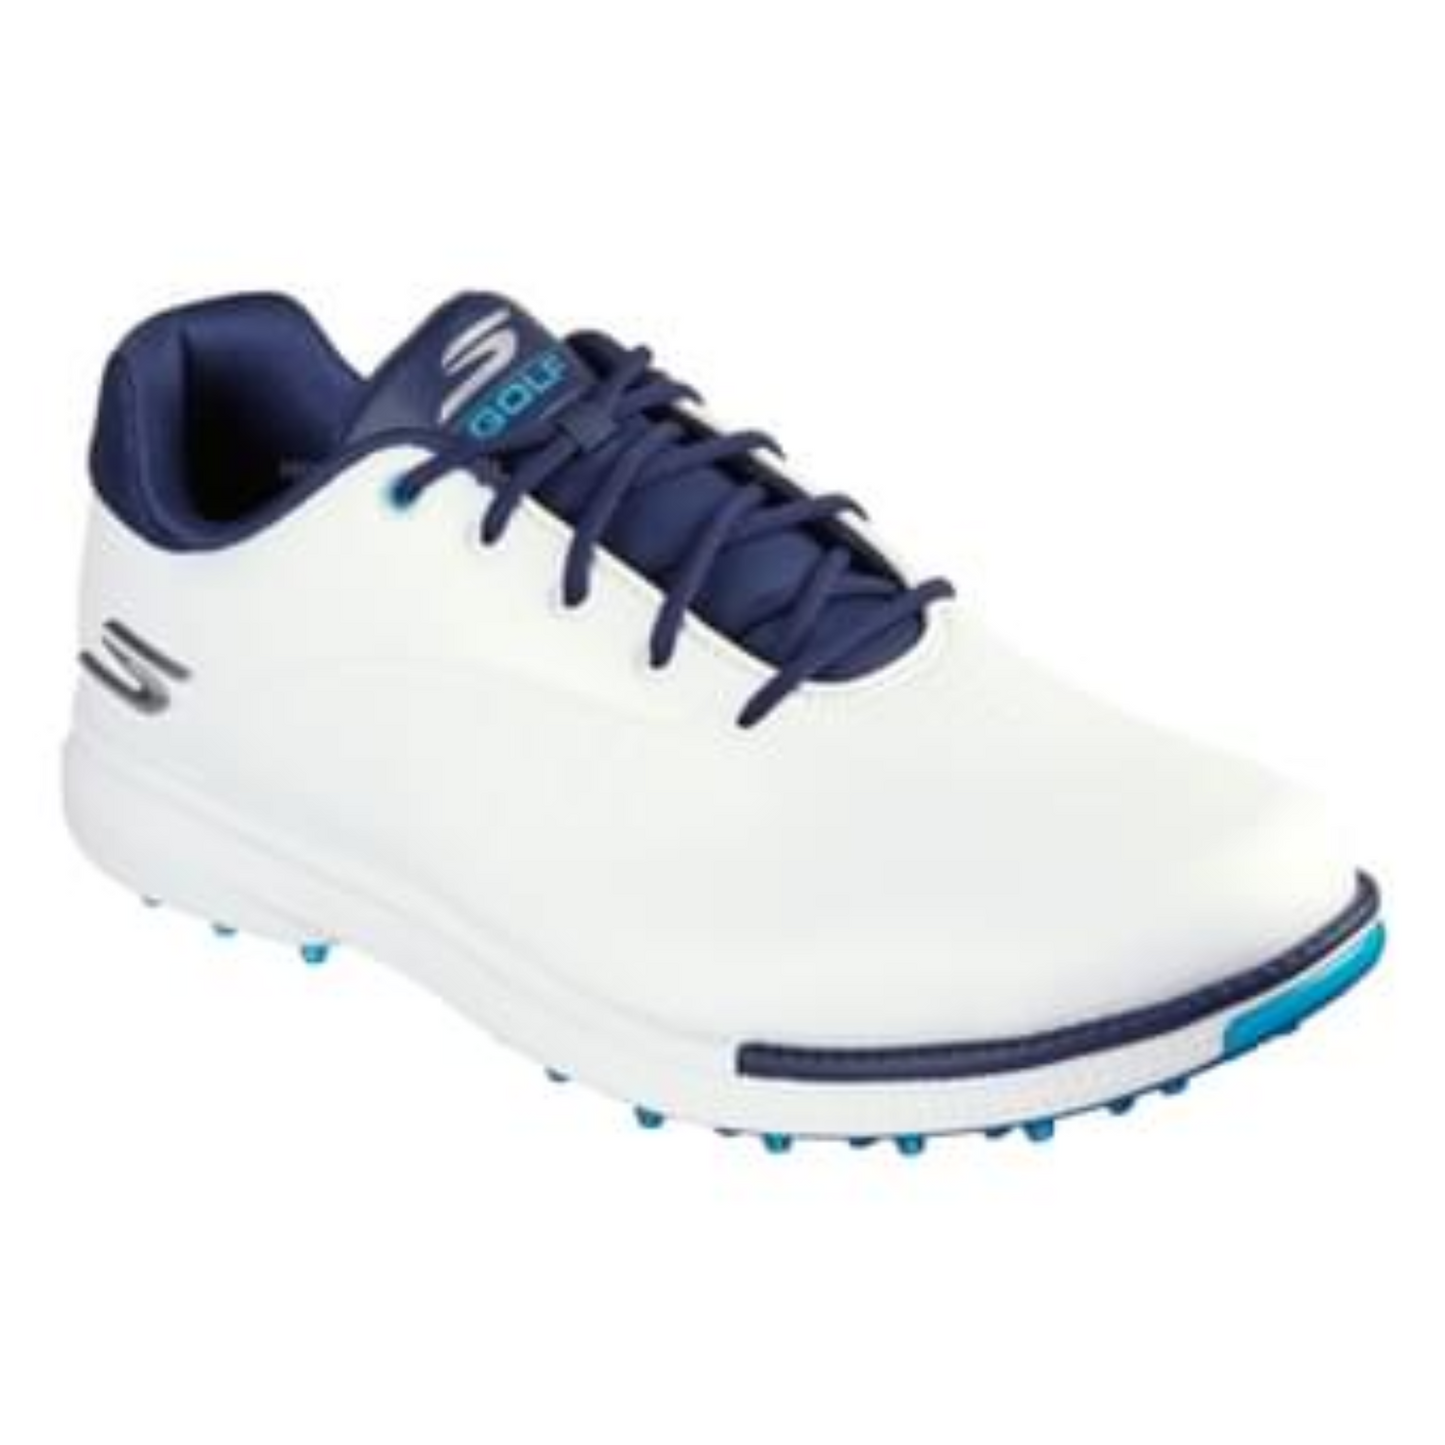 Skechers Go Golf Tempo GF Spikeless Golf Shoes 214099 - White Navy   